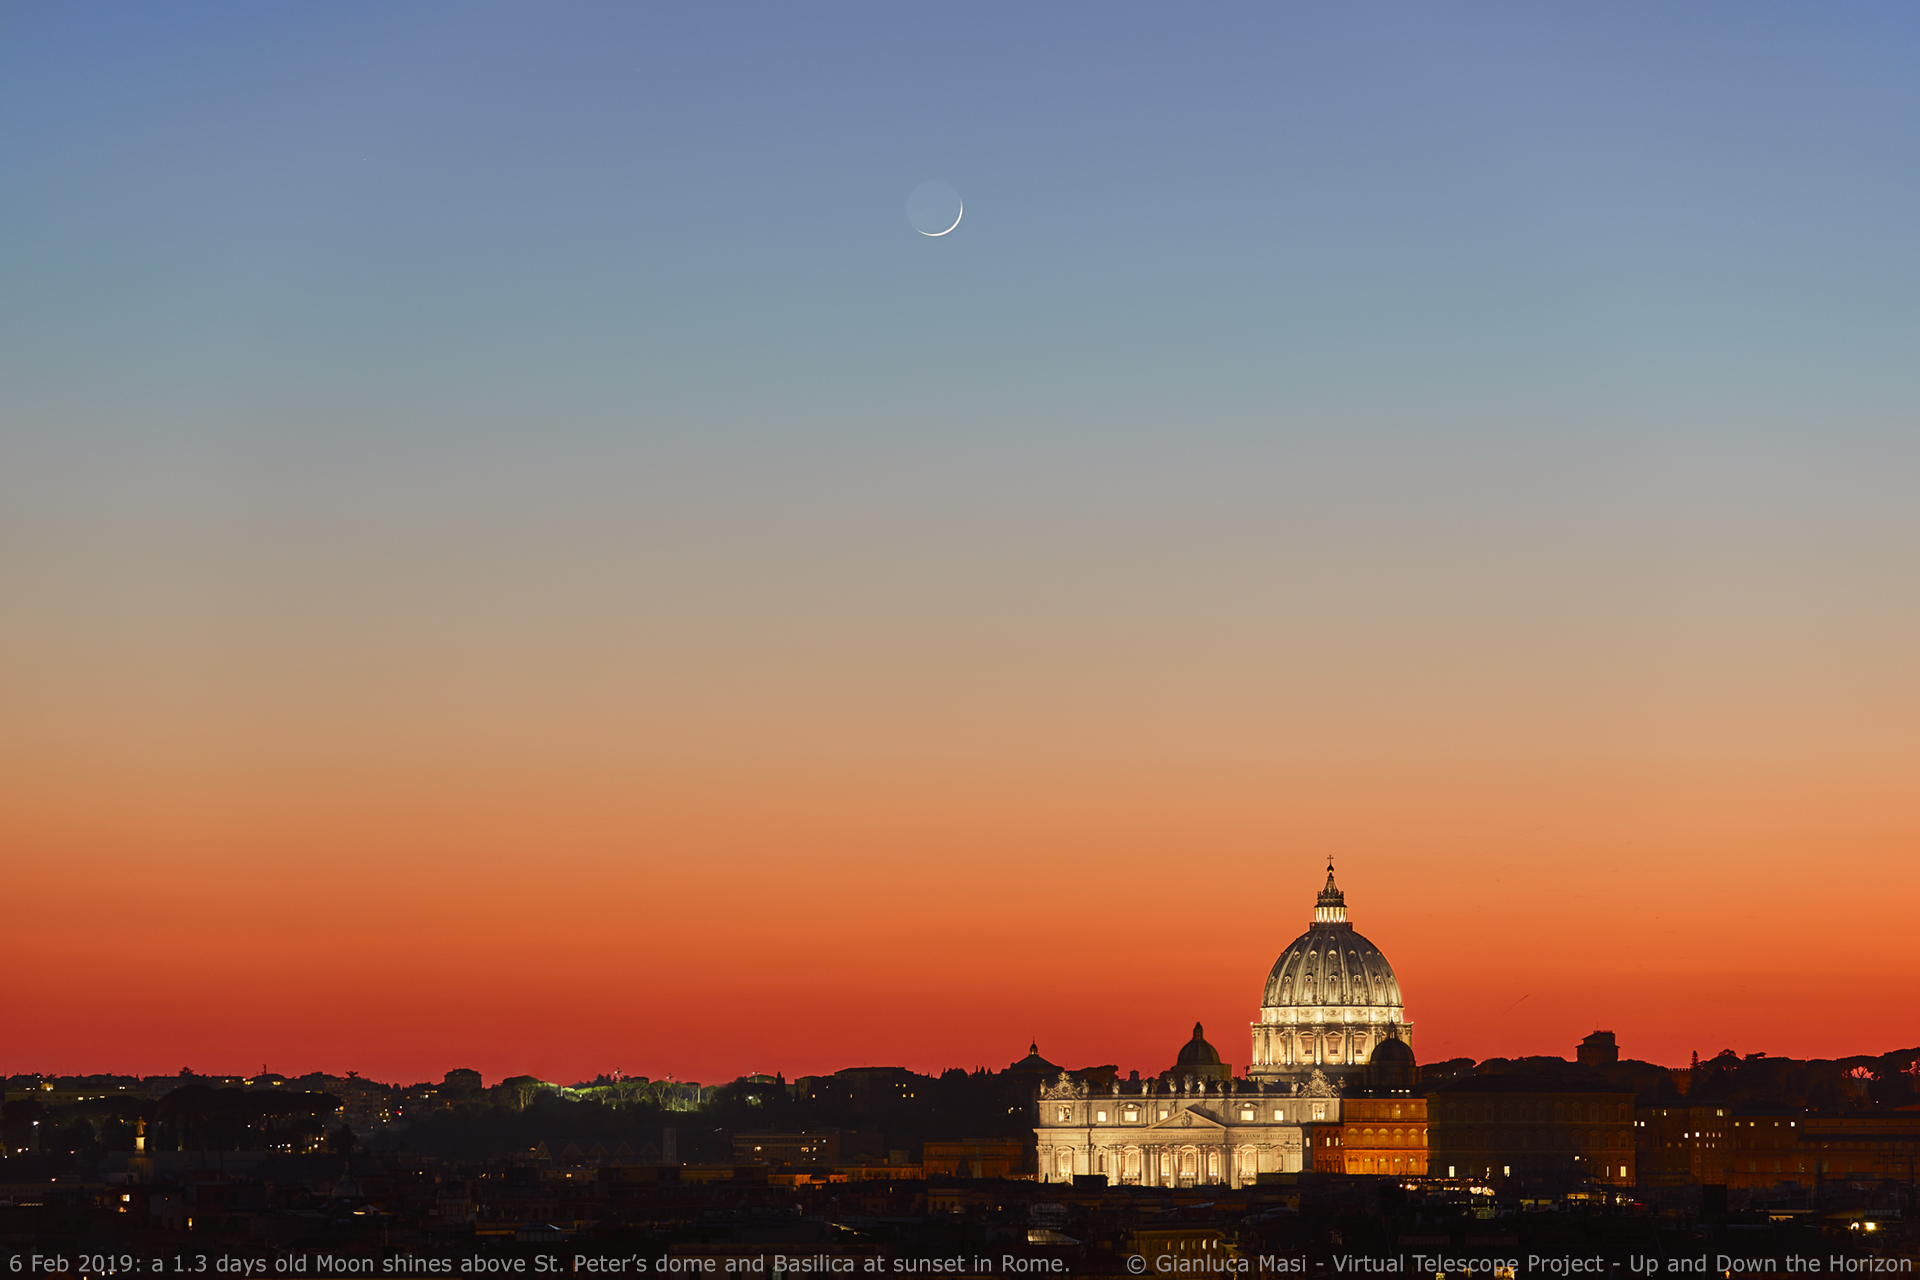 Stunning colors frame the unique vision of the Moon above St. Peter's Basilica - 6 Feb. 2019